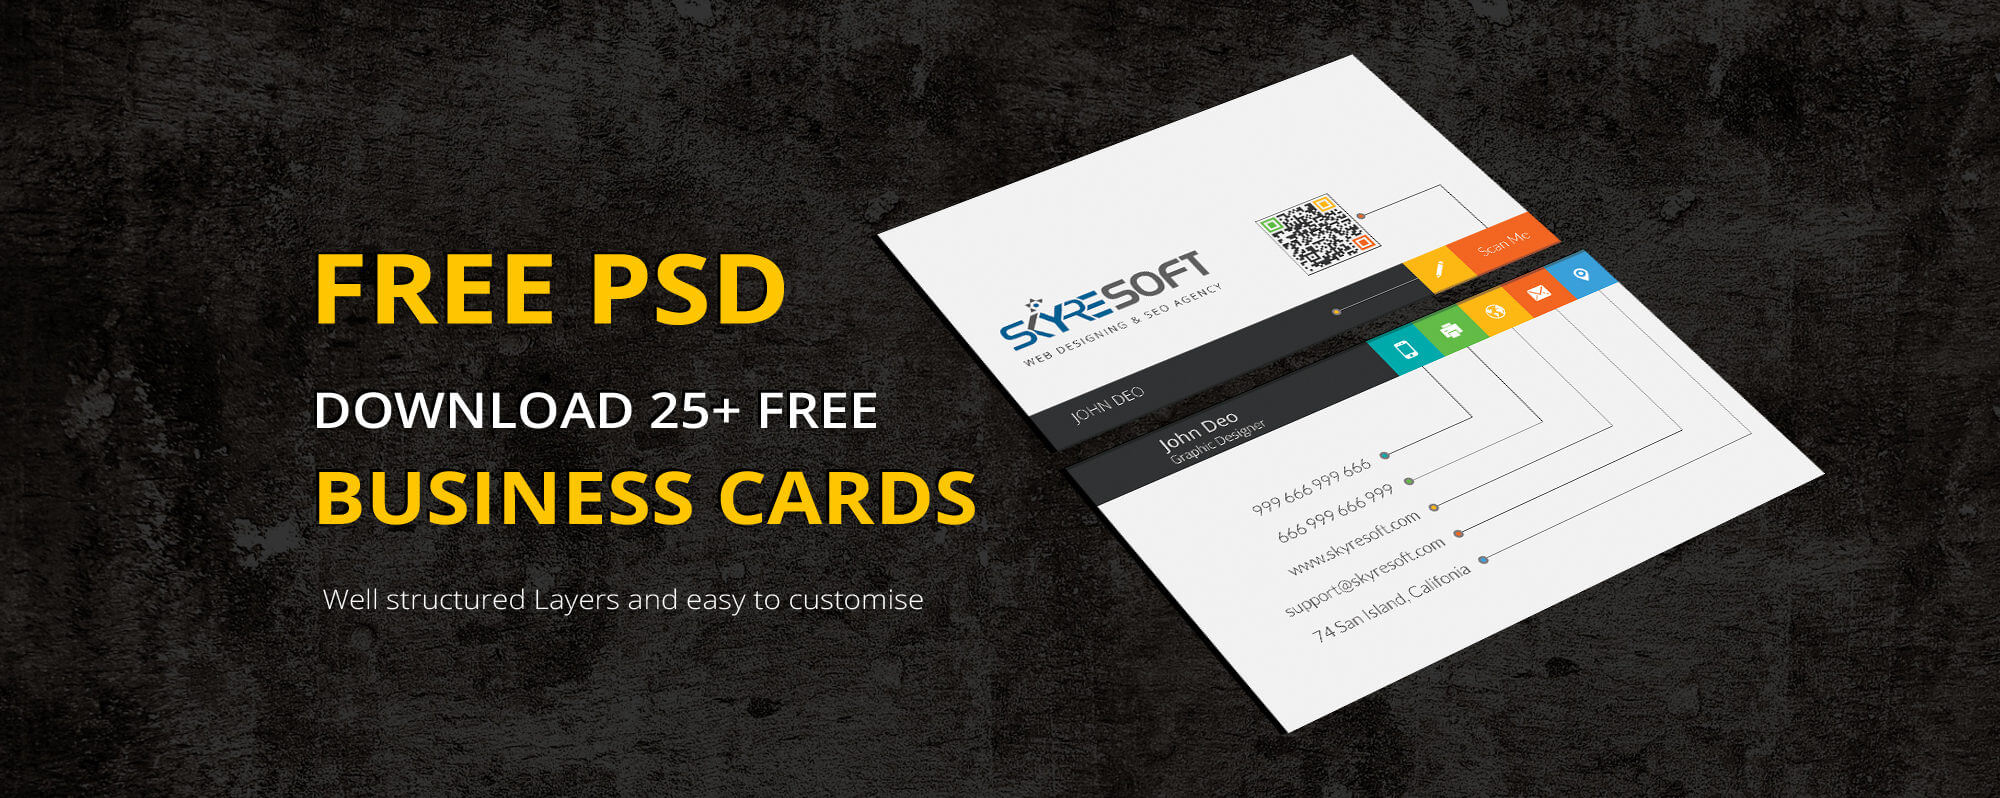 25 Creative Free Psd Business Card Templates 2019 With Web Design Business Cards Templates